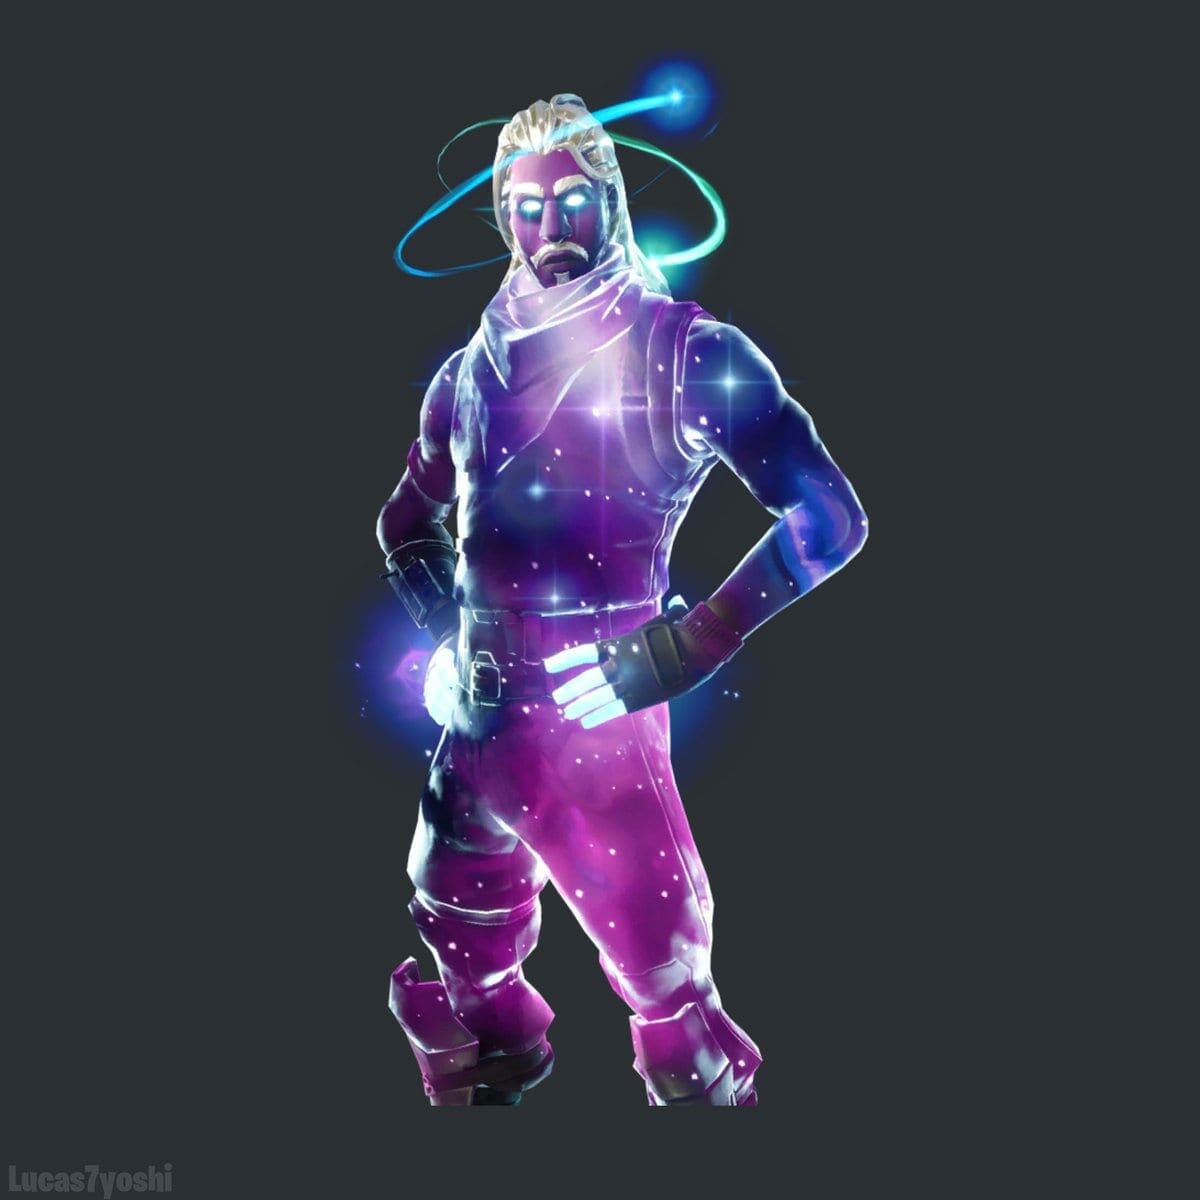 Fortnite Leaked Skins And Cosmetics In Update 5 20 Found By Dataminers - galaxy skin